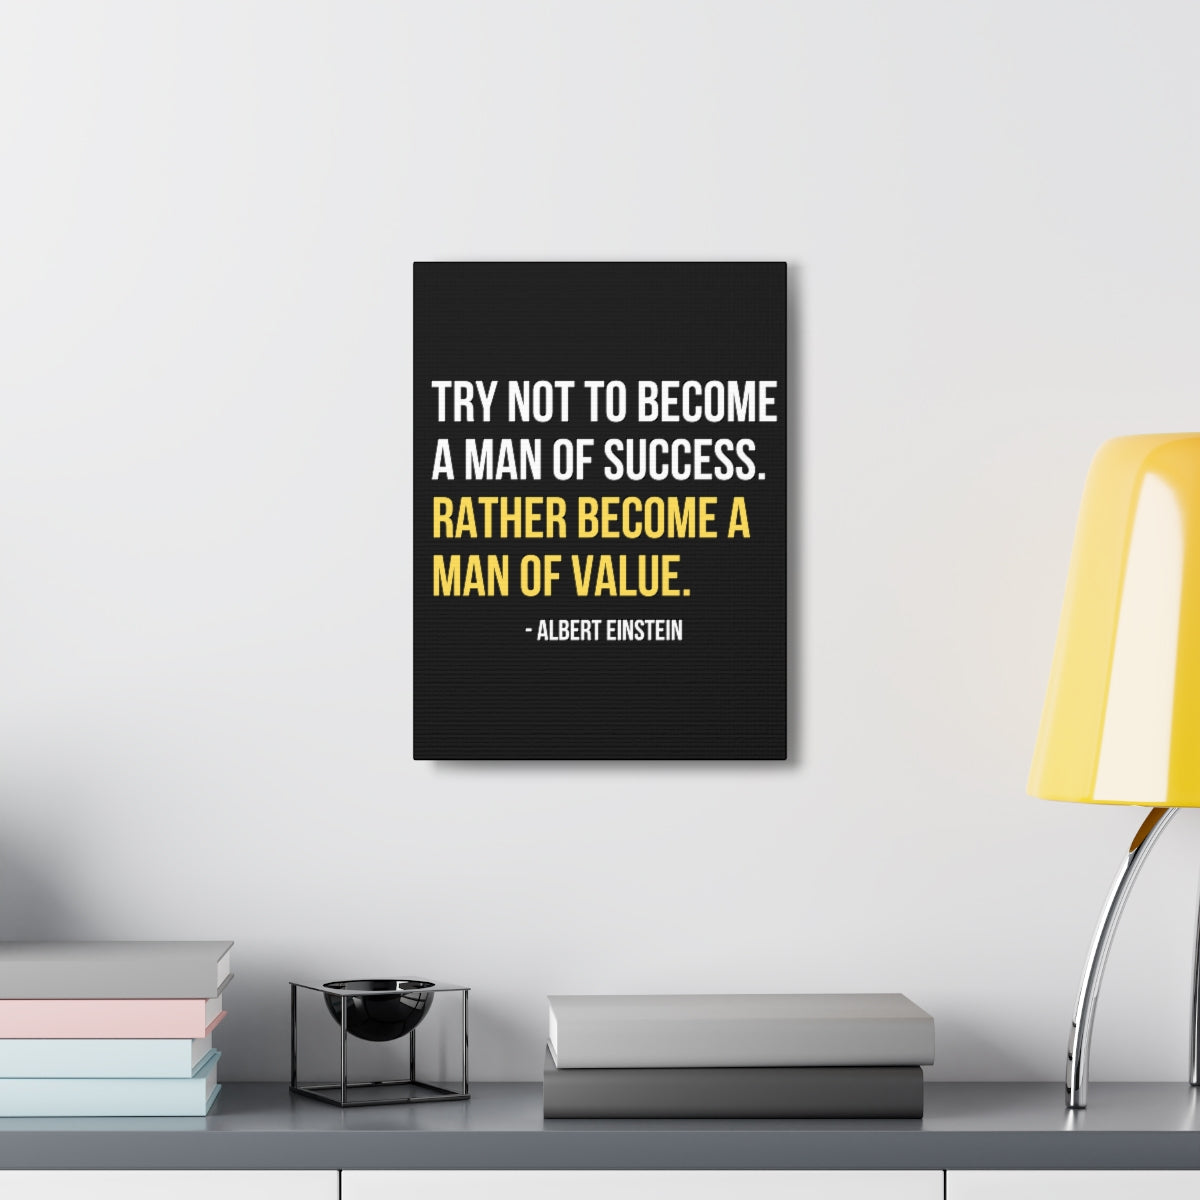 Scripture Walls Inspirational Wall Art A Man Of Value Motivation Wall Decor for Home Office Gym Inspiring Success Quote Print Ready to Hang Unframed-Express Your Love Gifts